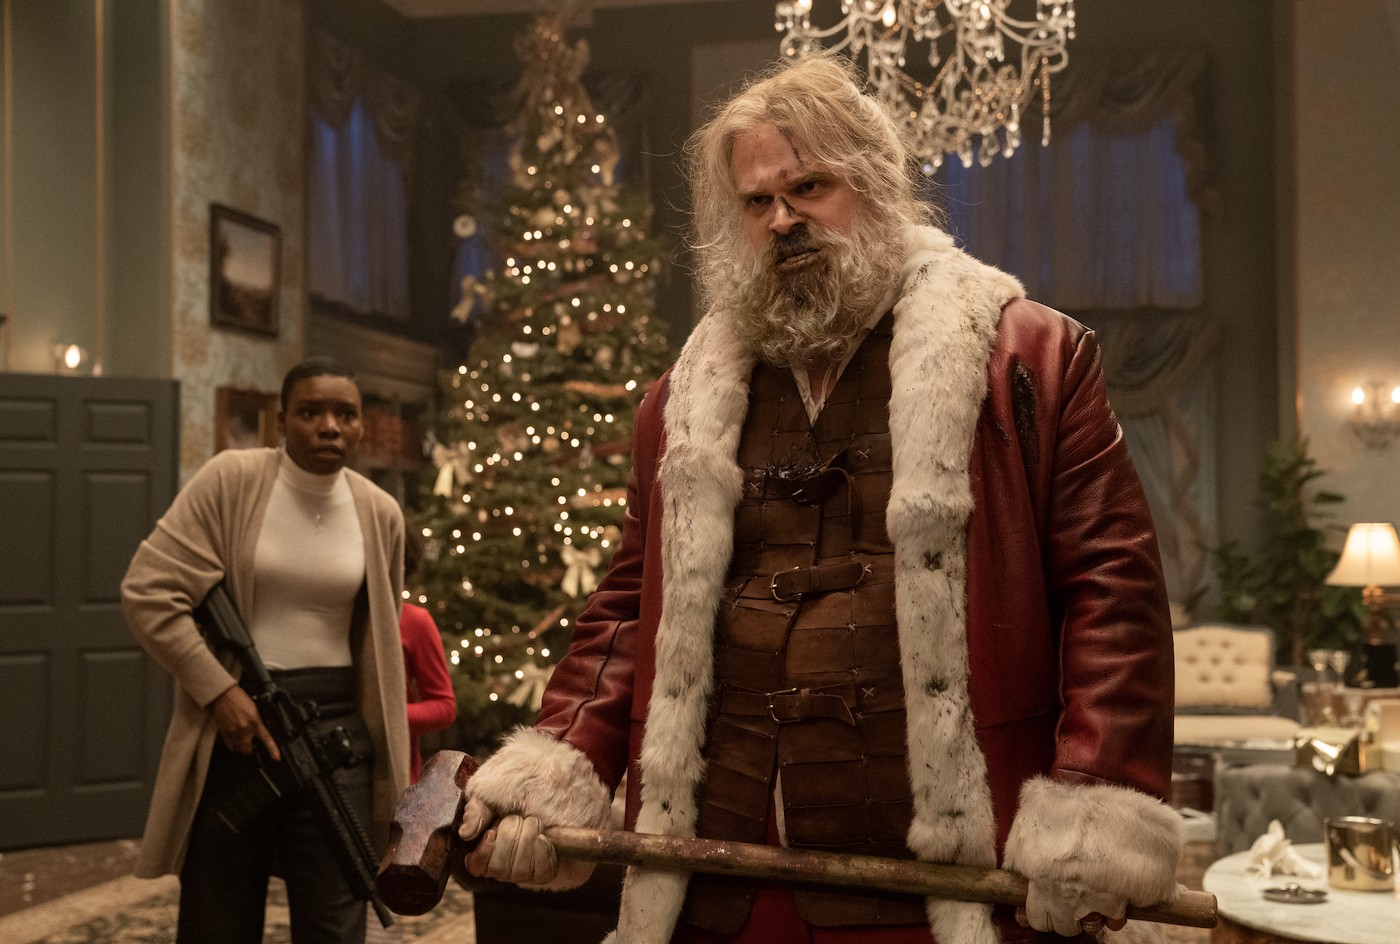 David Harbour dressed as Santa Claus, holding a sledgehammer.